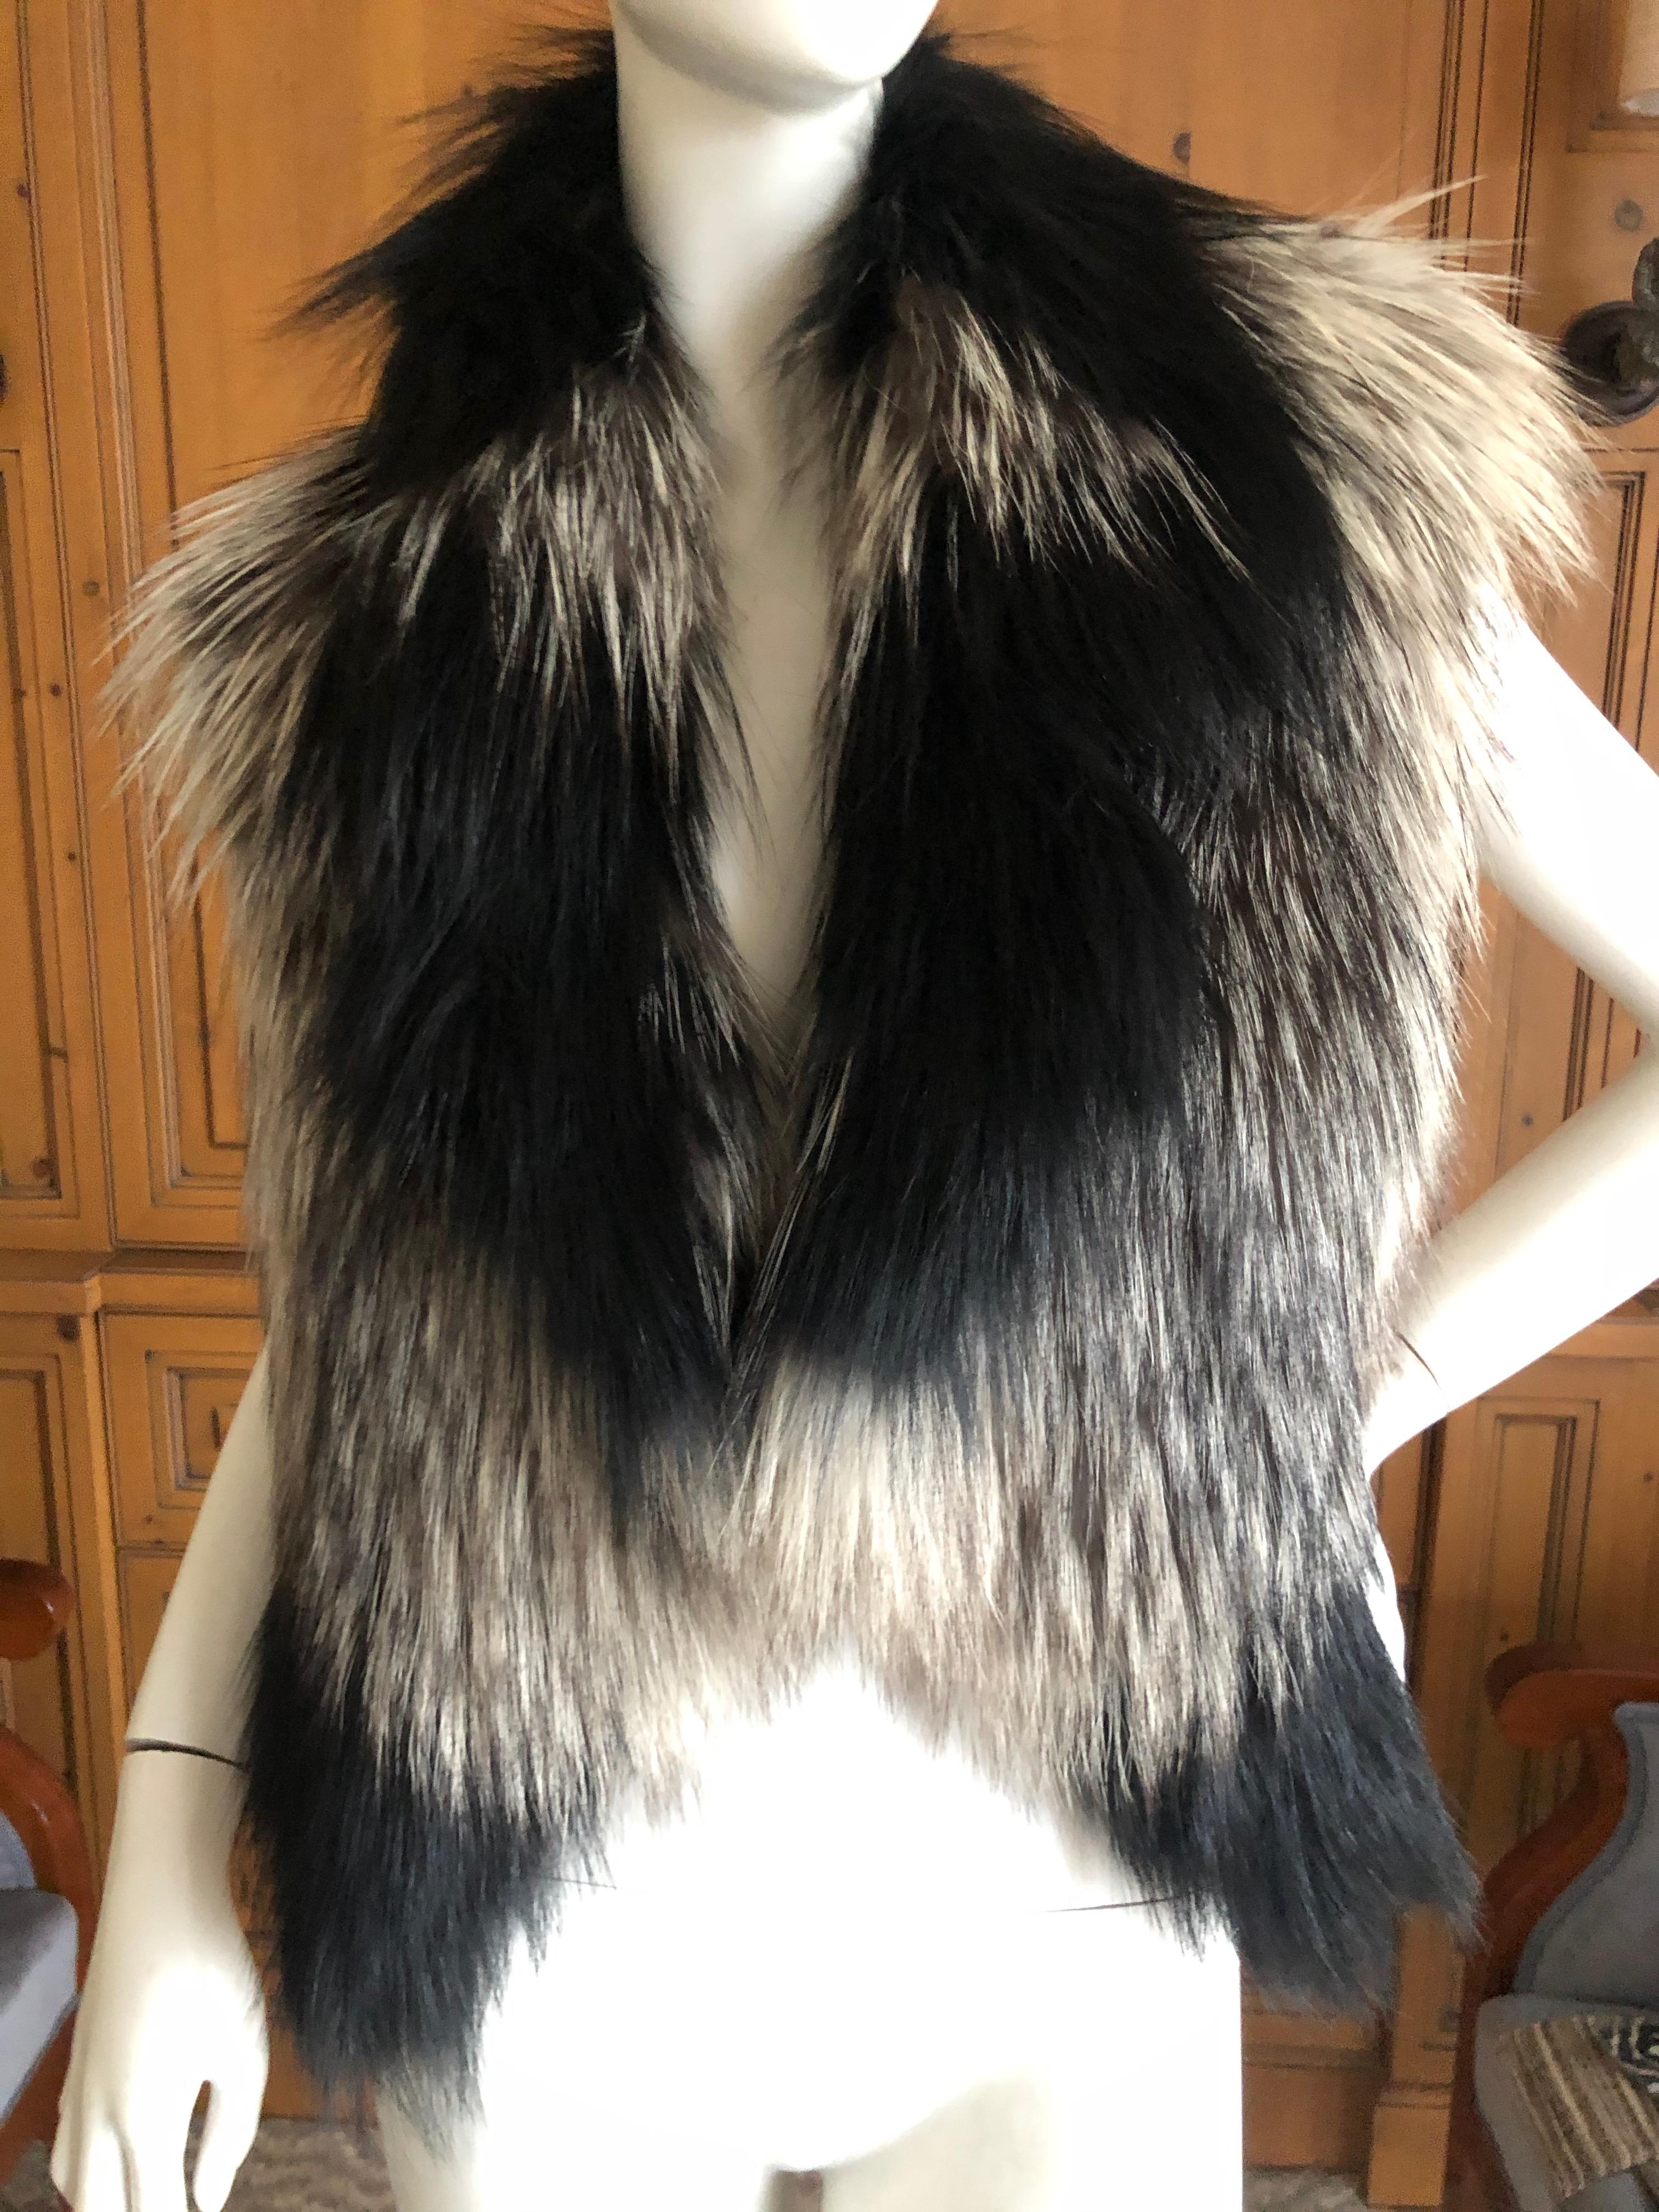 J. Mendel Paris Knit Fox Vest
This would be so beautiful over a leather jacket
18' long